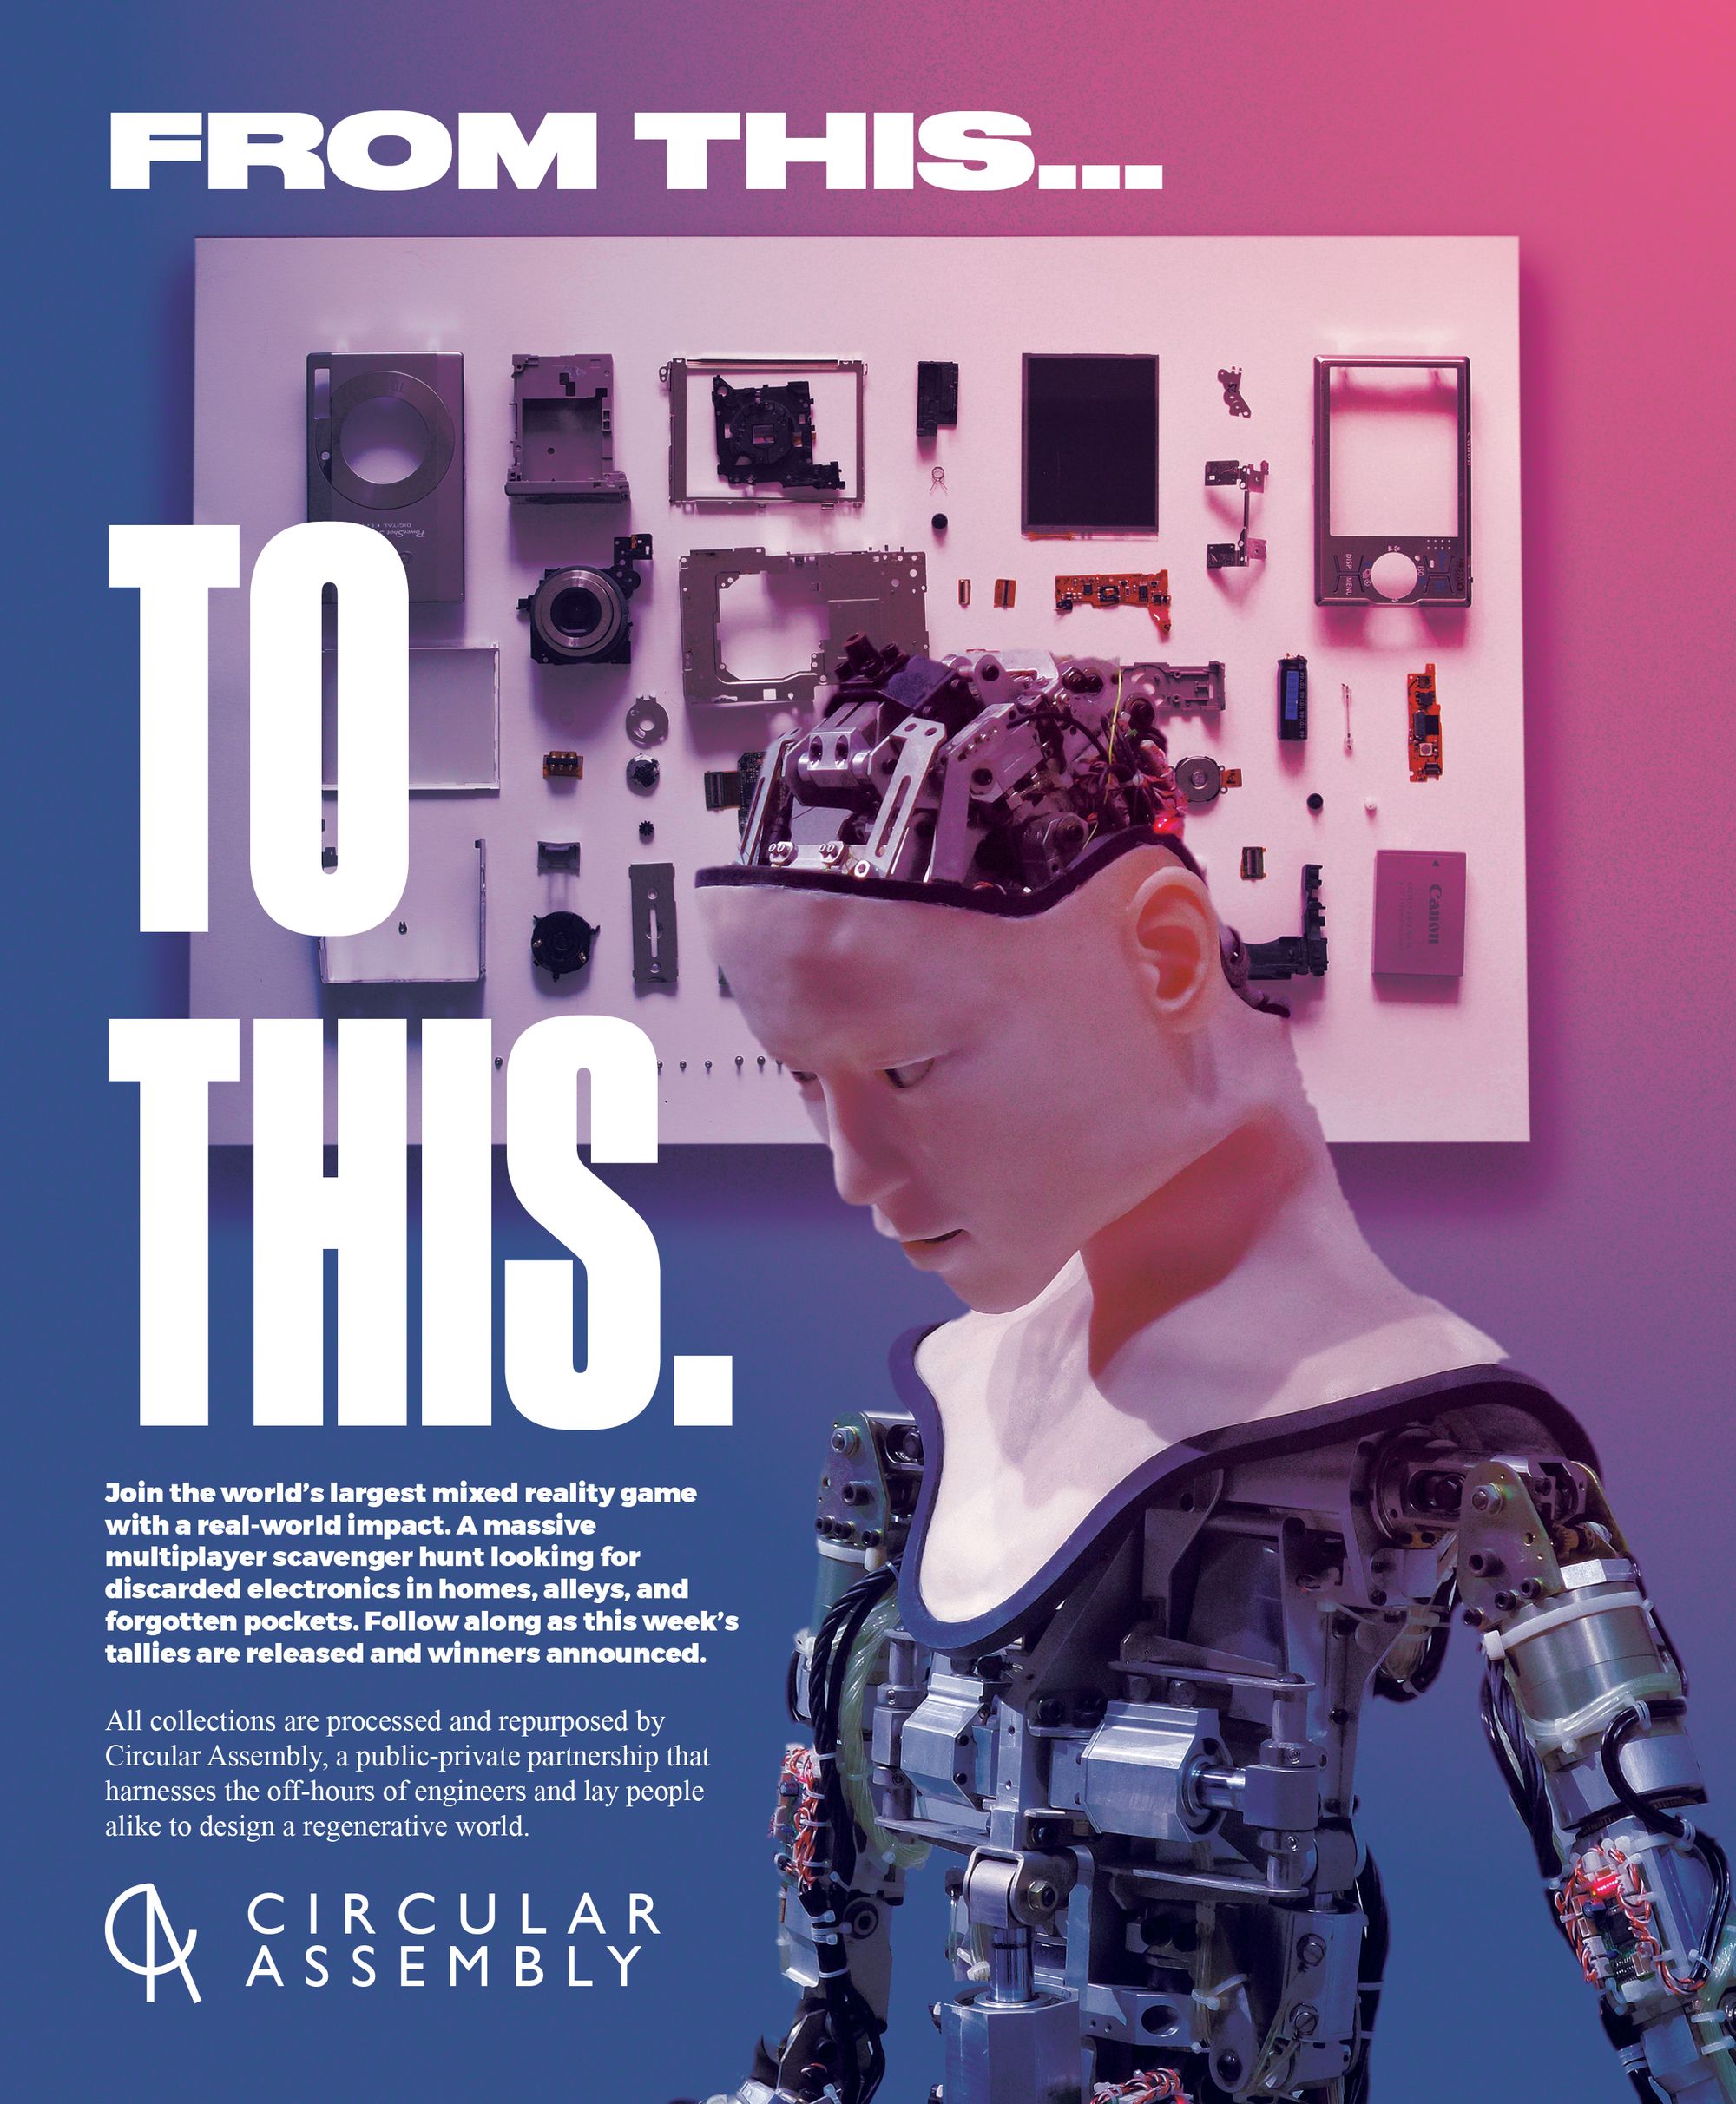 Ad stating "From this... to this," referencing the transition from the mechanical parts hung in the background to the humanoid robot in the foreground.